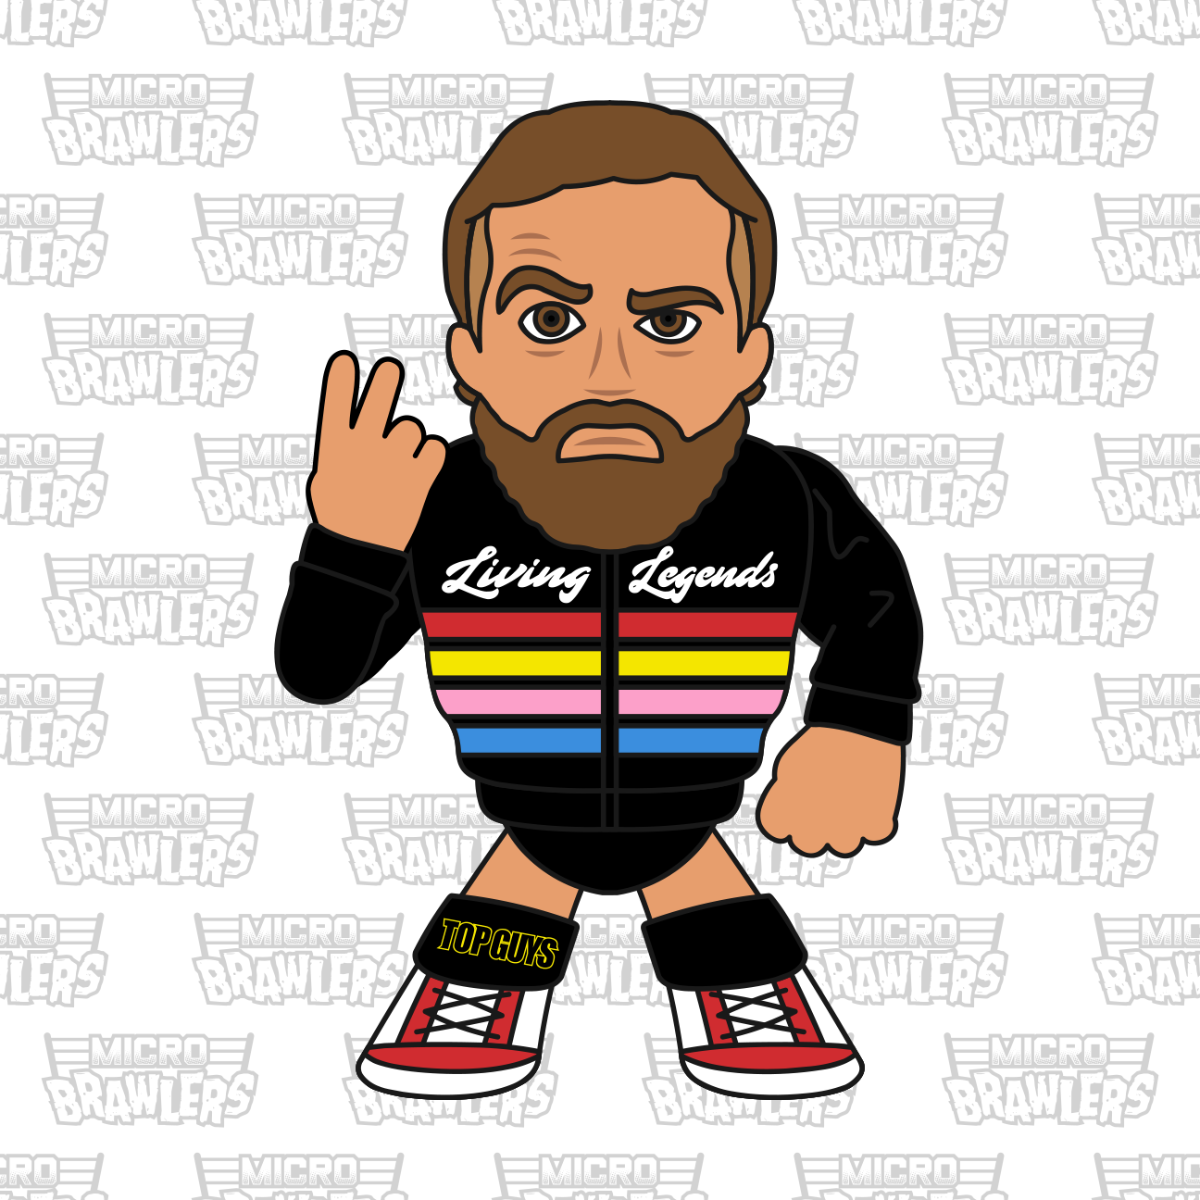 LAST CHANCE: The Acclaimed Official All Elite Wrestling Micro Brawlers® -  The First #AEW Tag Team 2-Pack, ProWrestlingTees.com/TheAccla